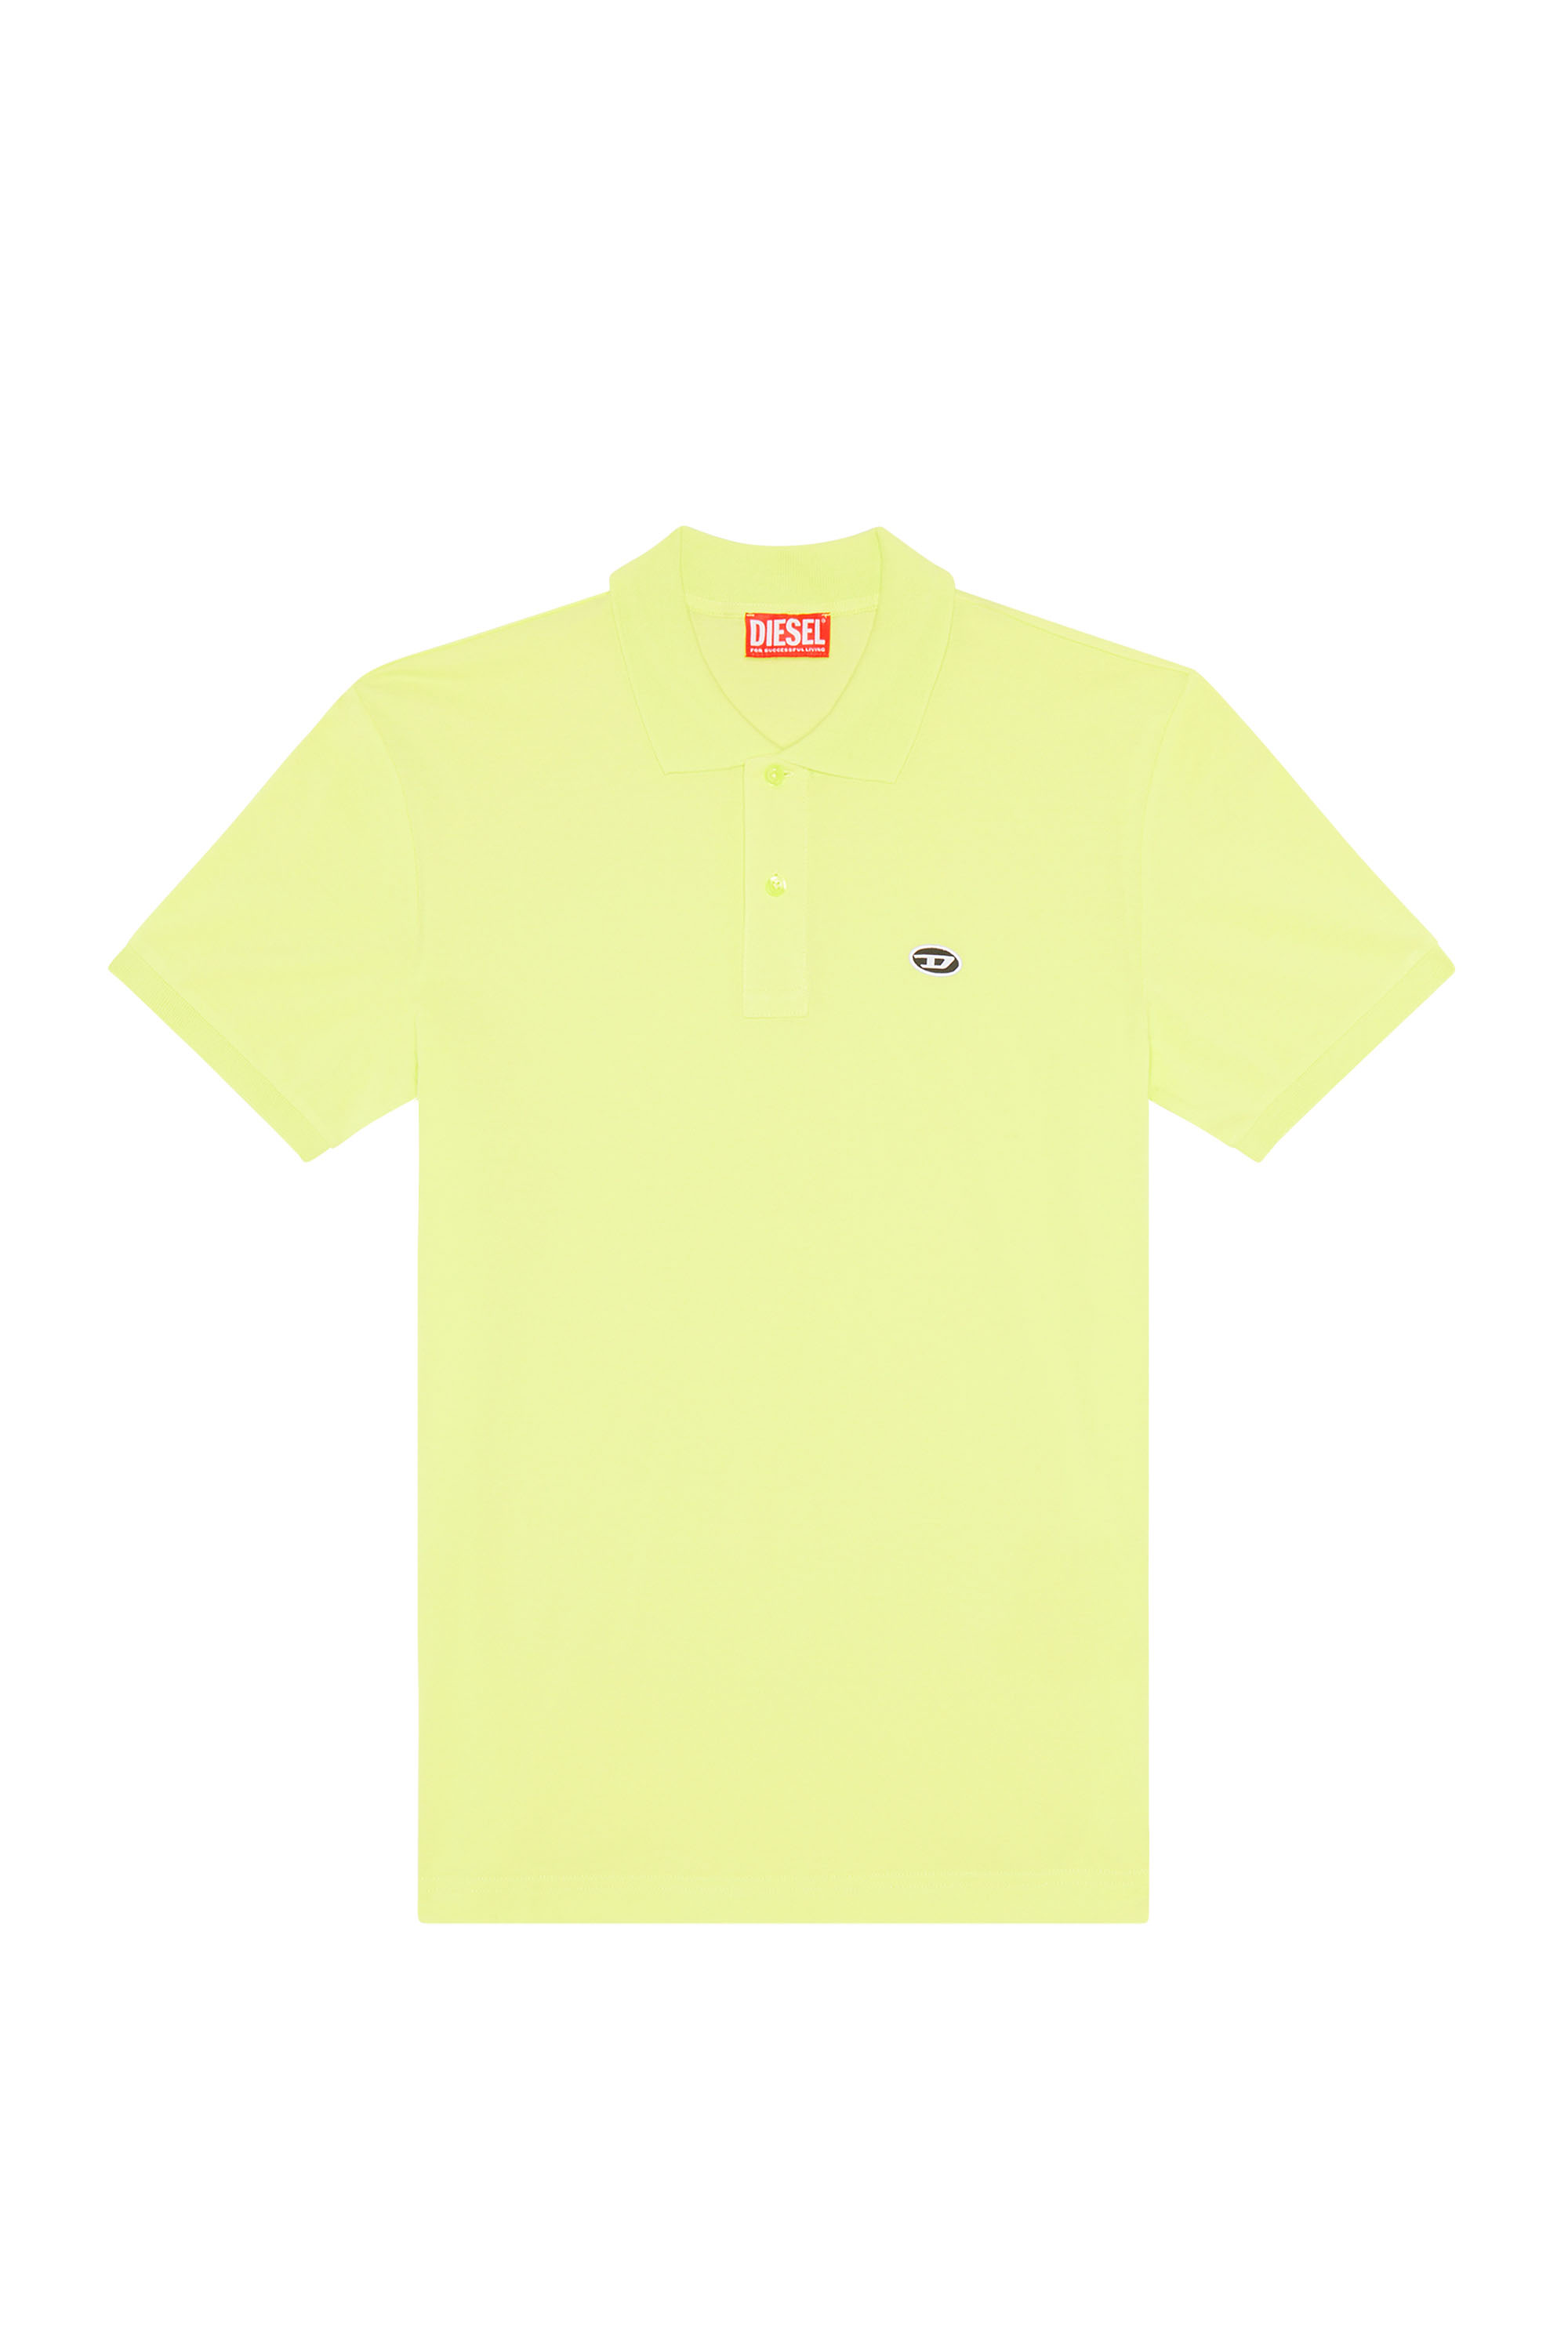 Diesel Polo Shirt With Oval D Patch In Yellow